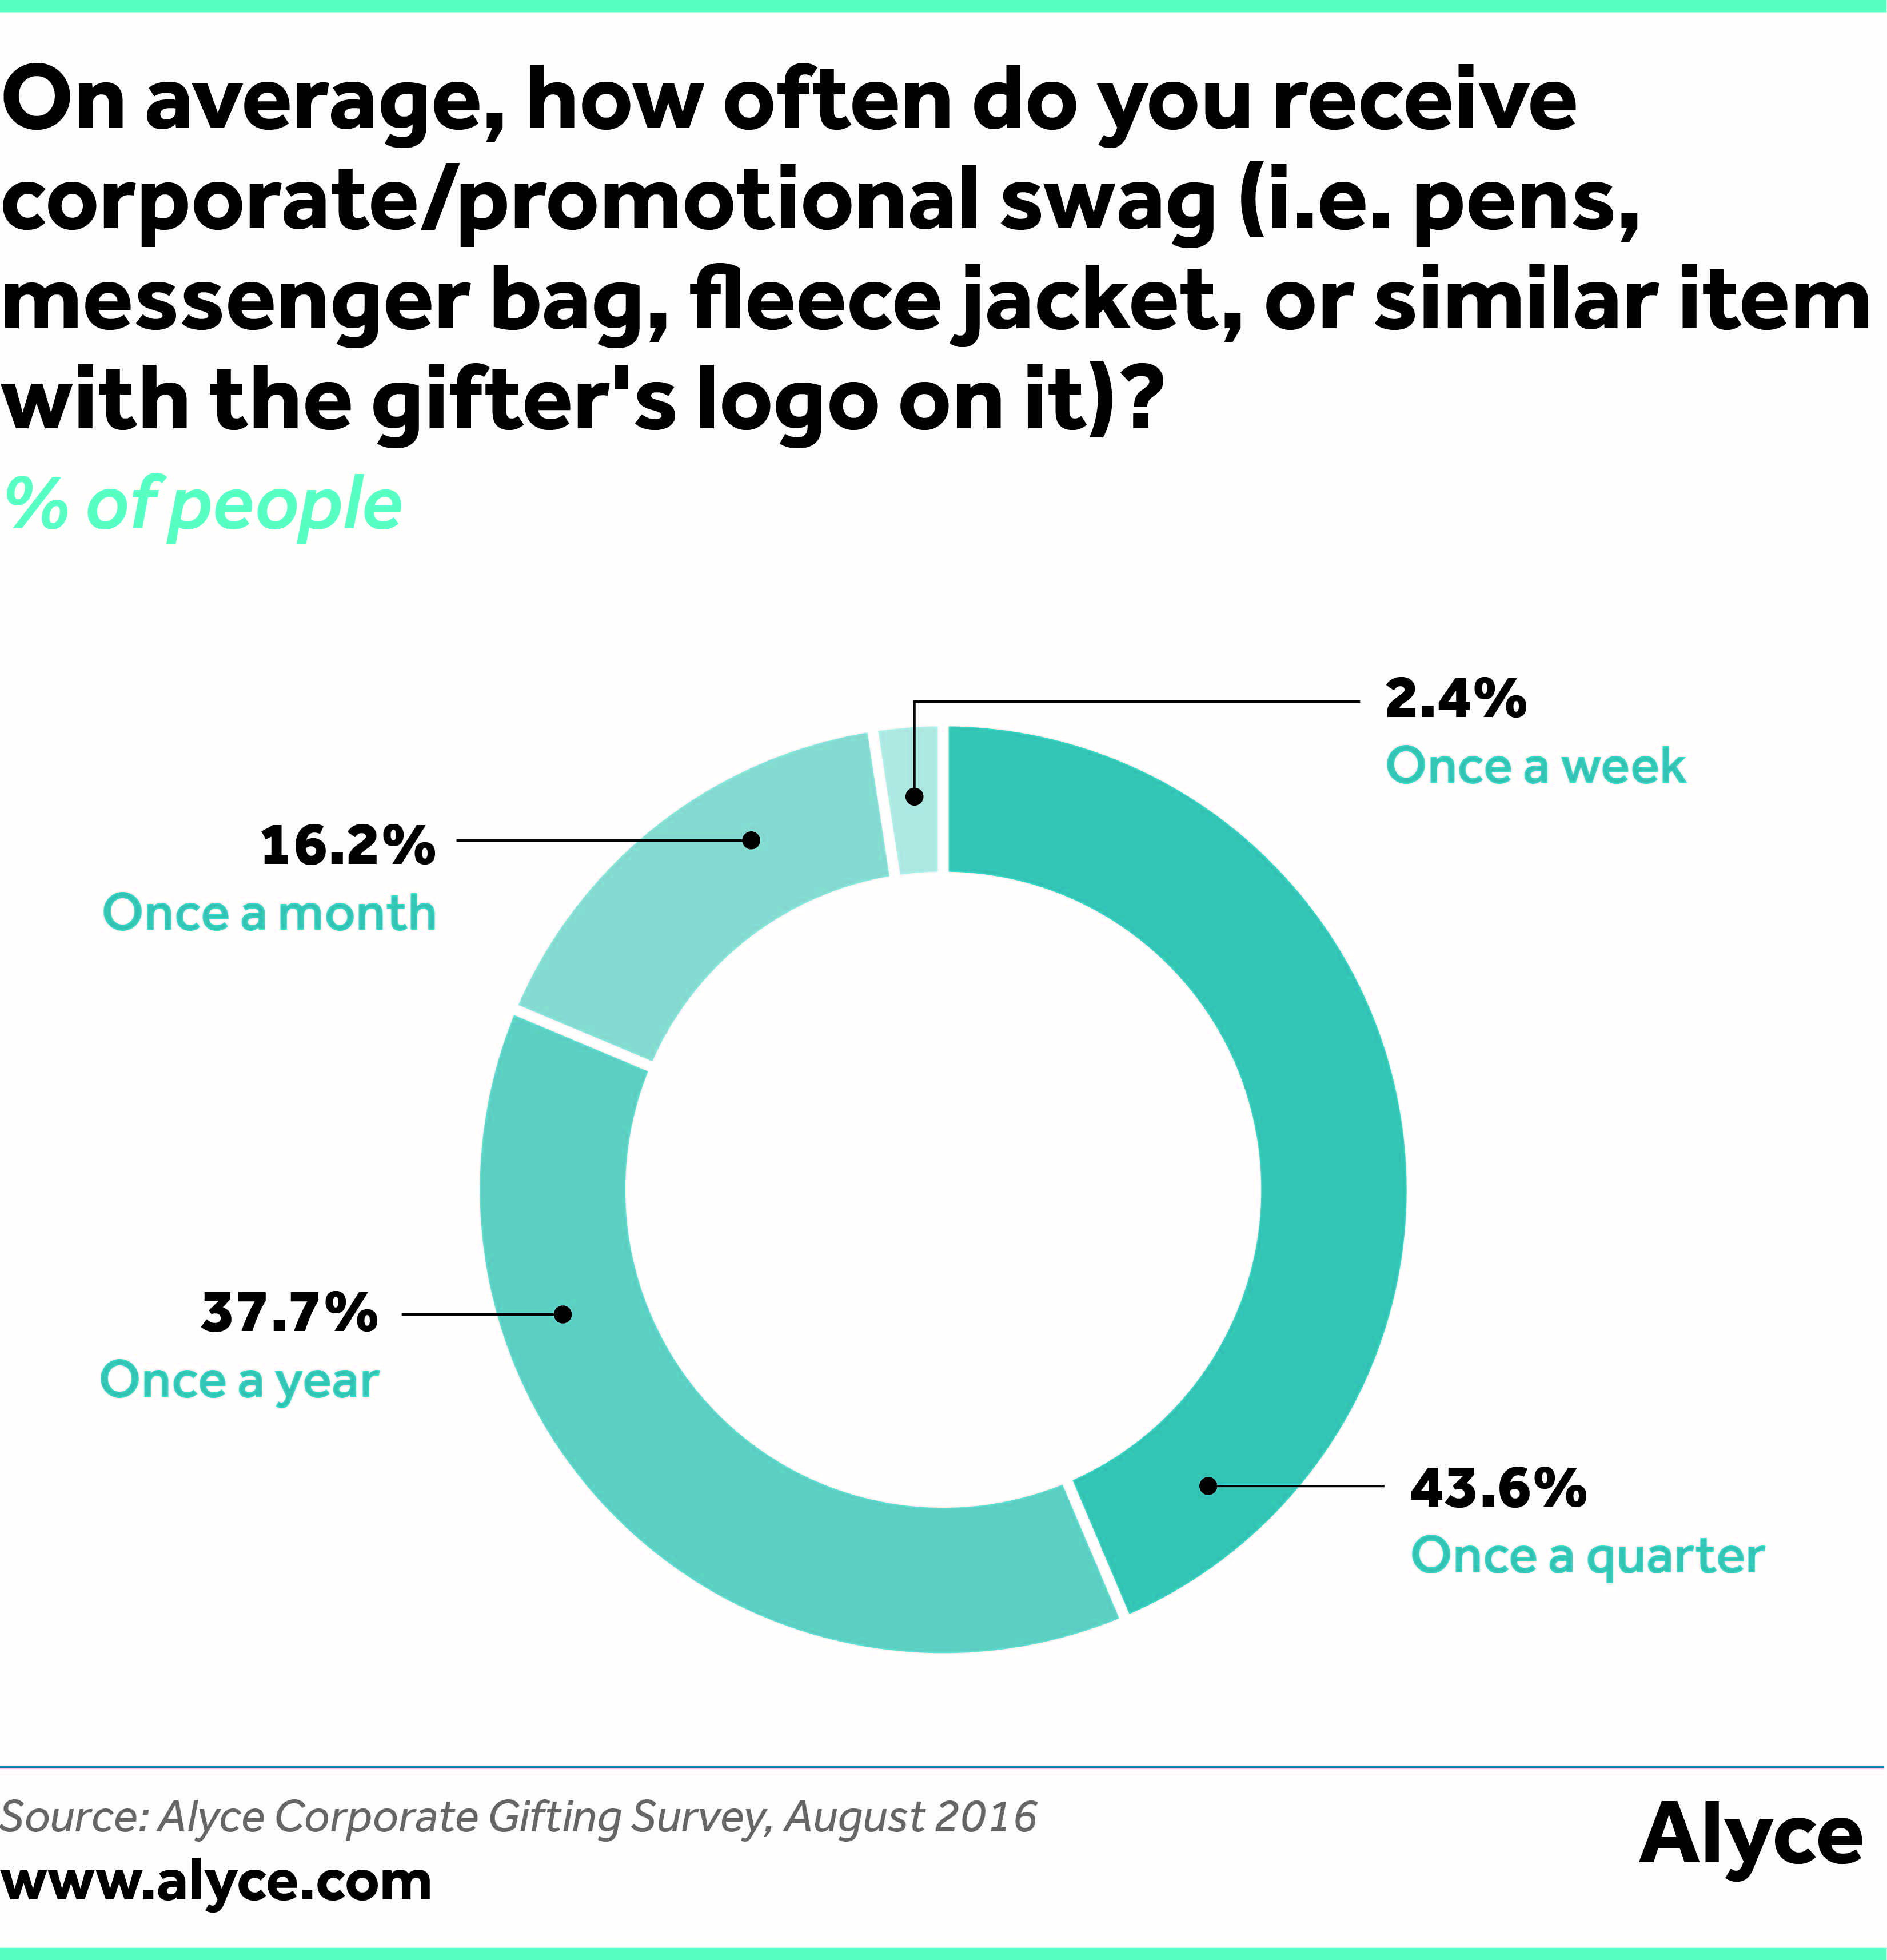 On average, how often do you receive corporate/promotional swag (i.e. pens, messenger bag, fleece jacket, or similar item with the grifter's logo on it)?